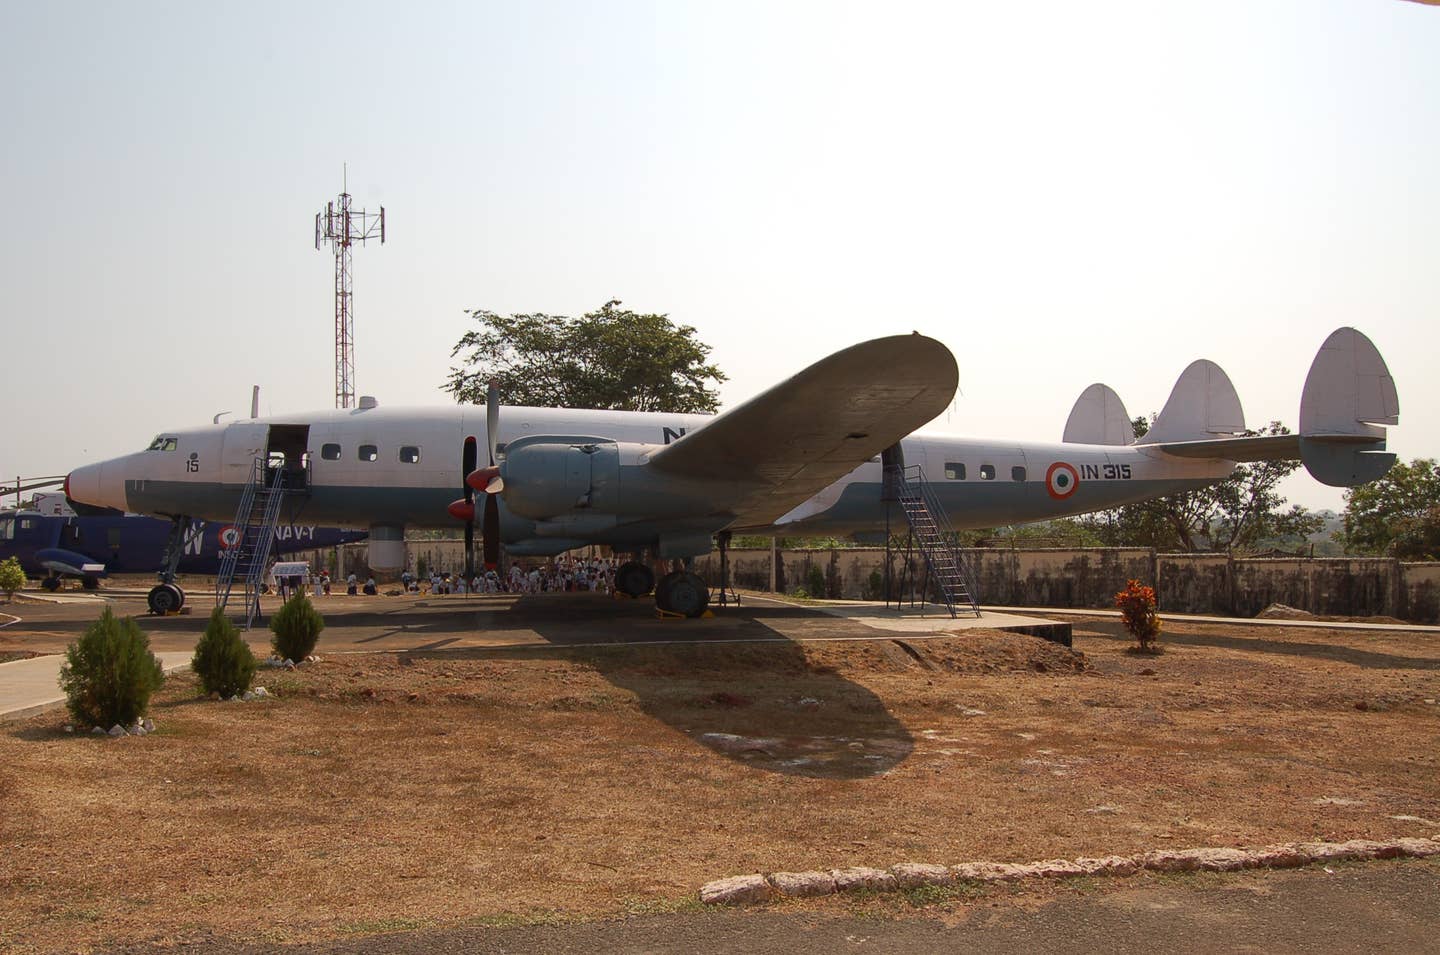 A Lockheed L-1049 Super Constellation preserved at the Indian Naval Museum, Goa, India. <em>Alec Wilson/Wikimedia Commons</em>